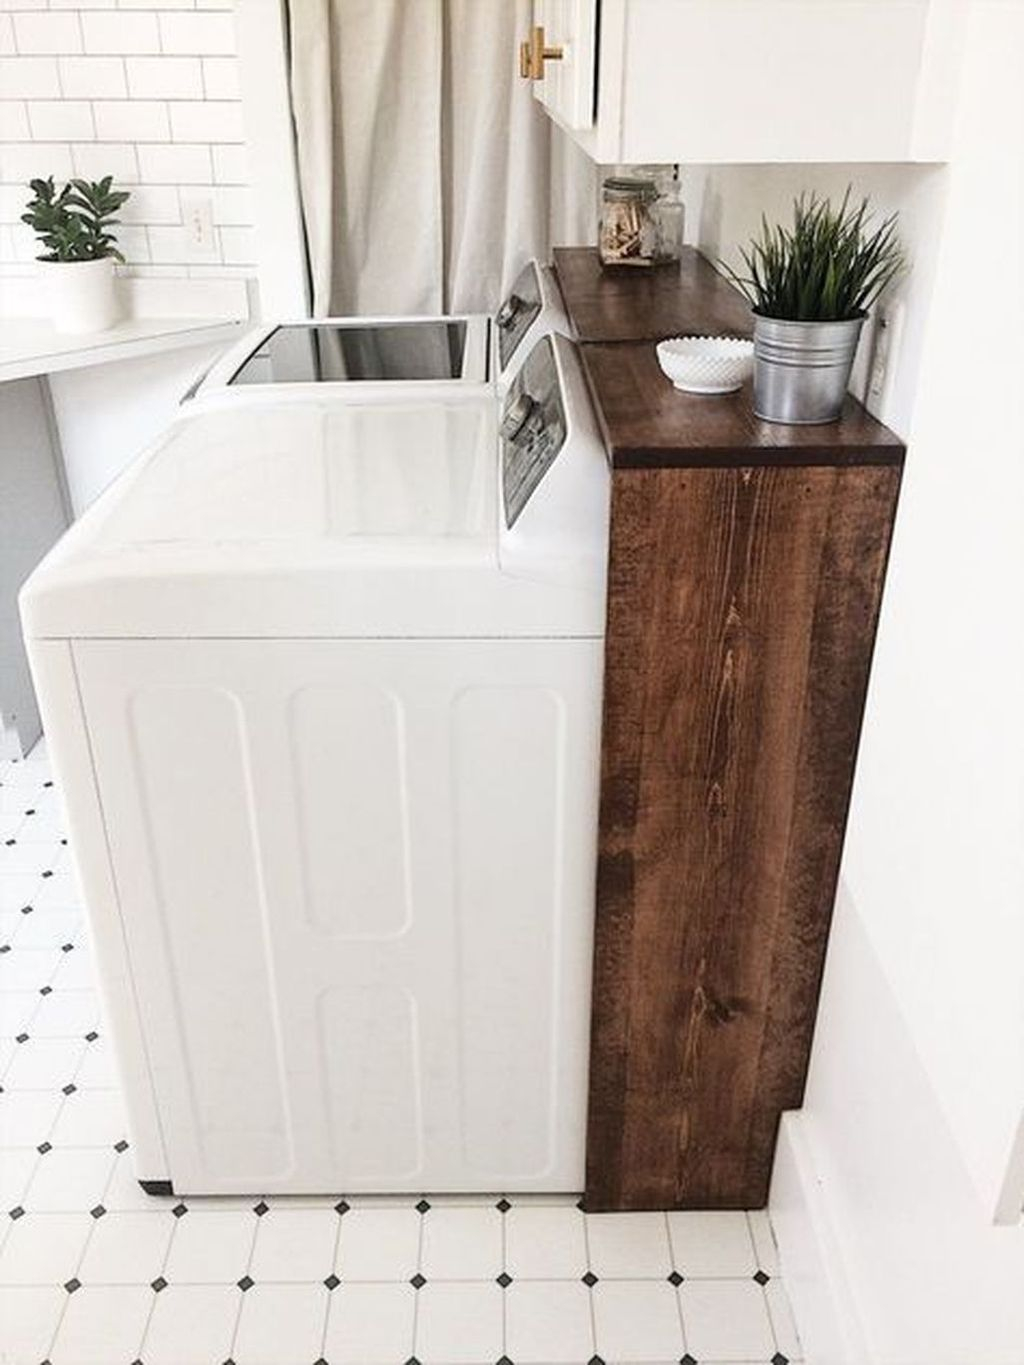 Favored Laundry Room Organization Ideas To Try 16